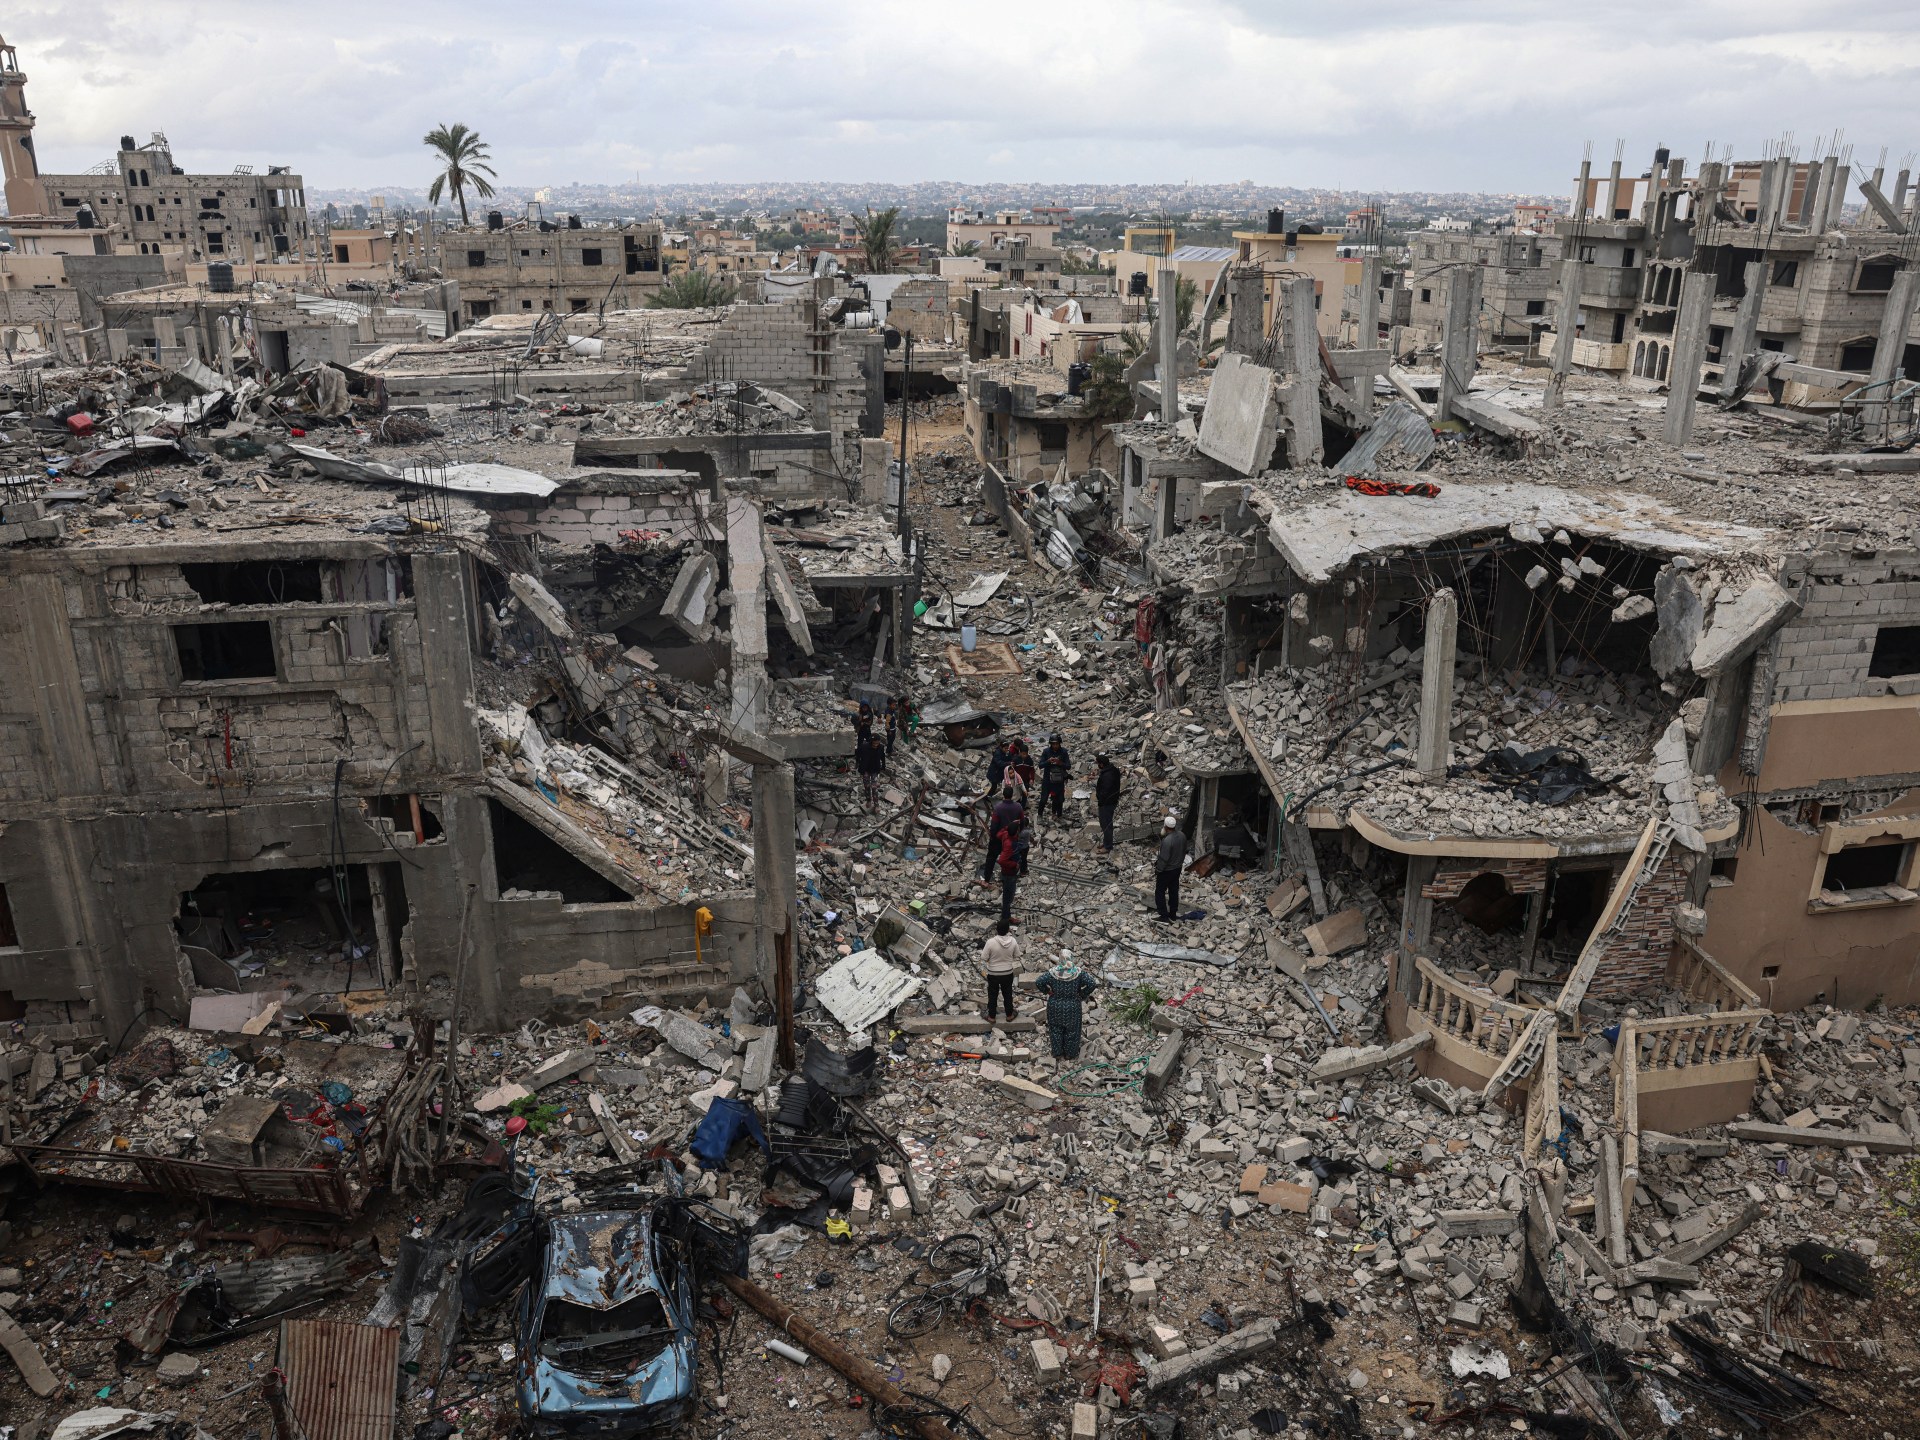 “We will rebuild”: Gaza families return to their destroyed homes |  Israel-Palestine conflict